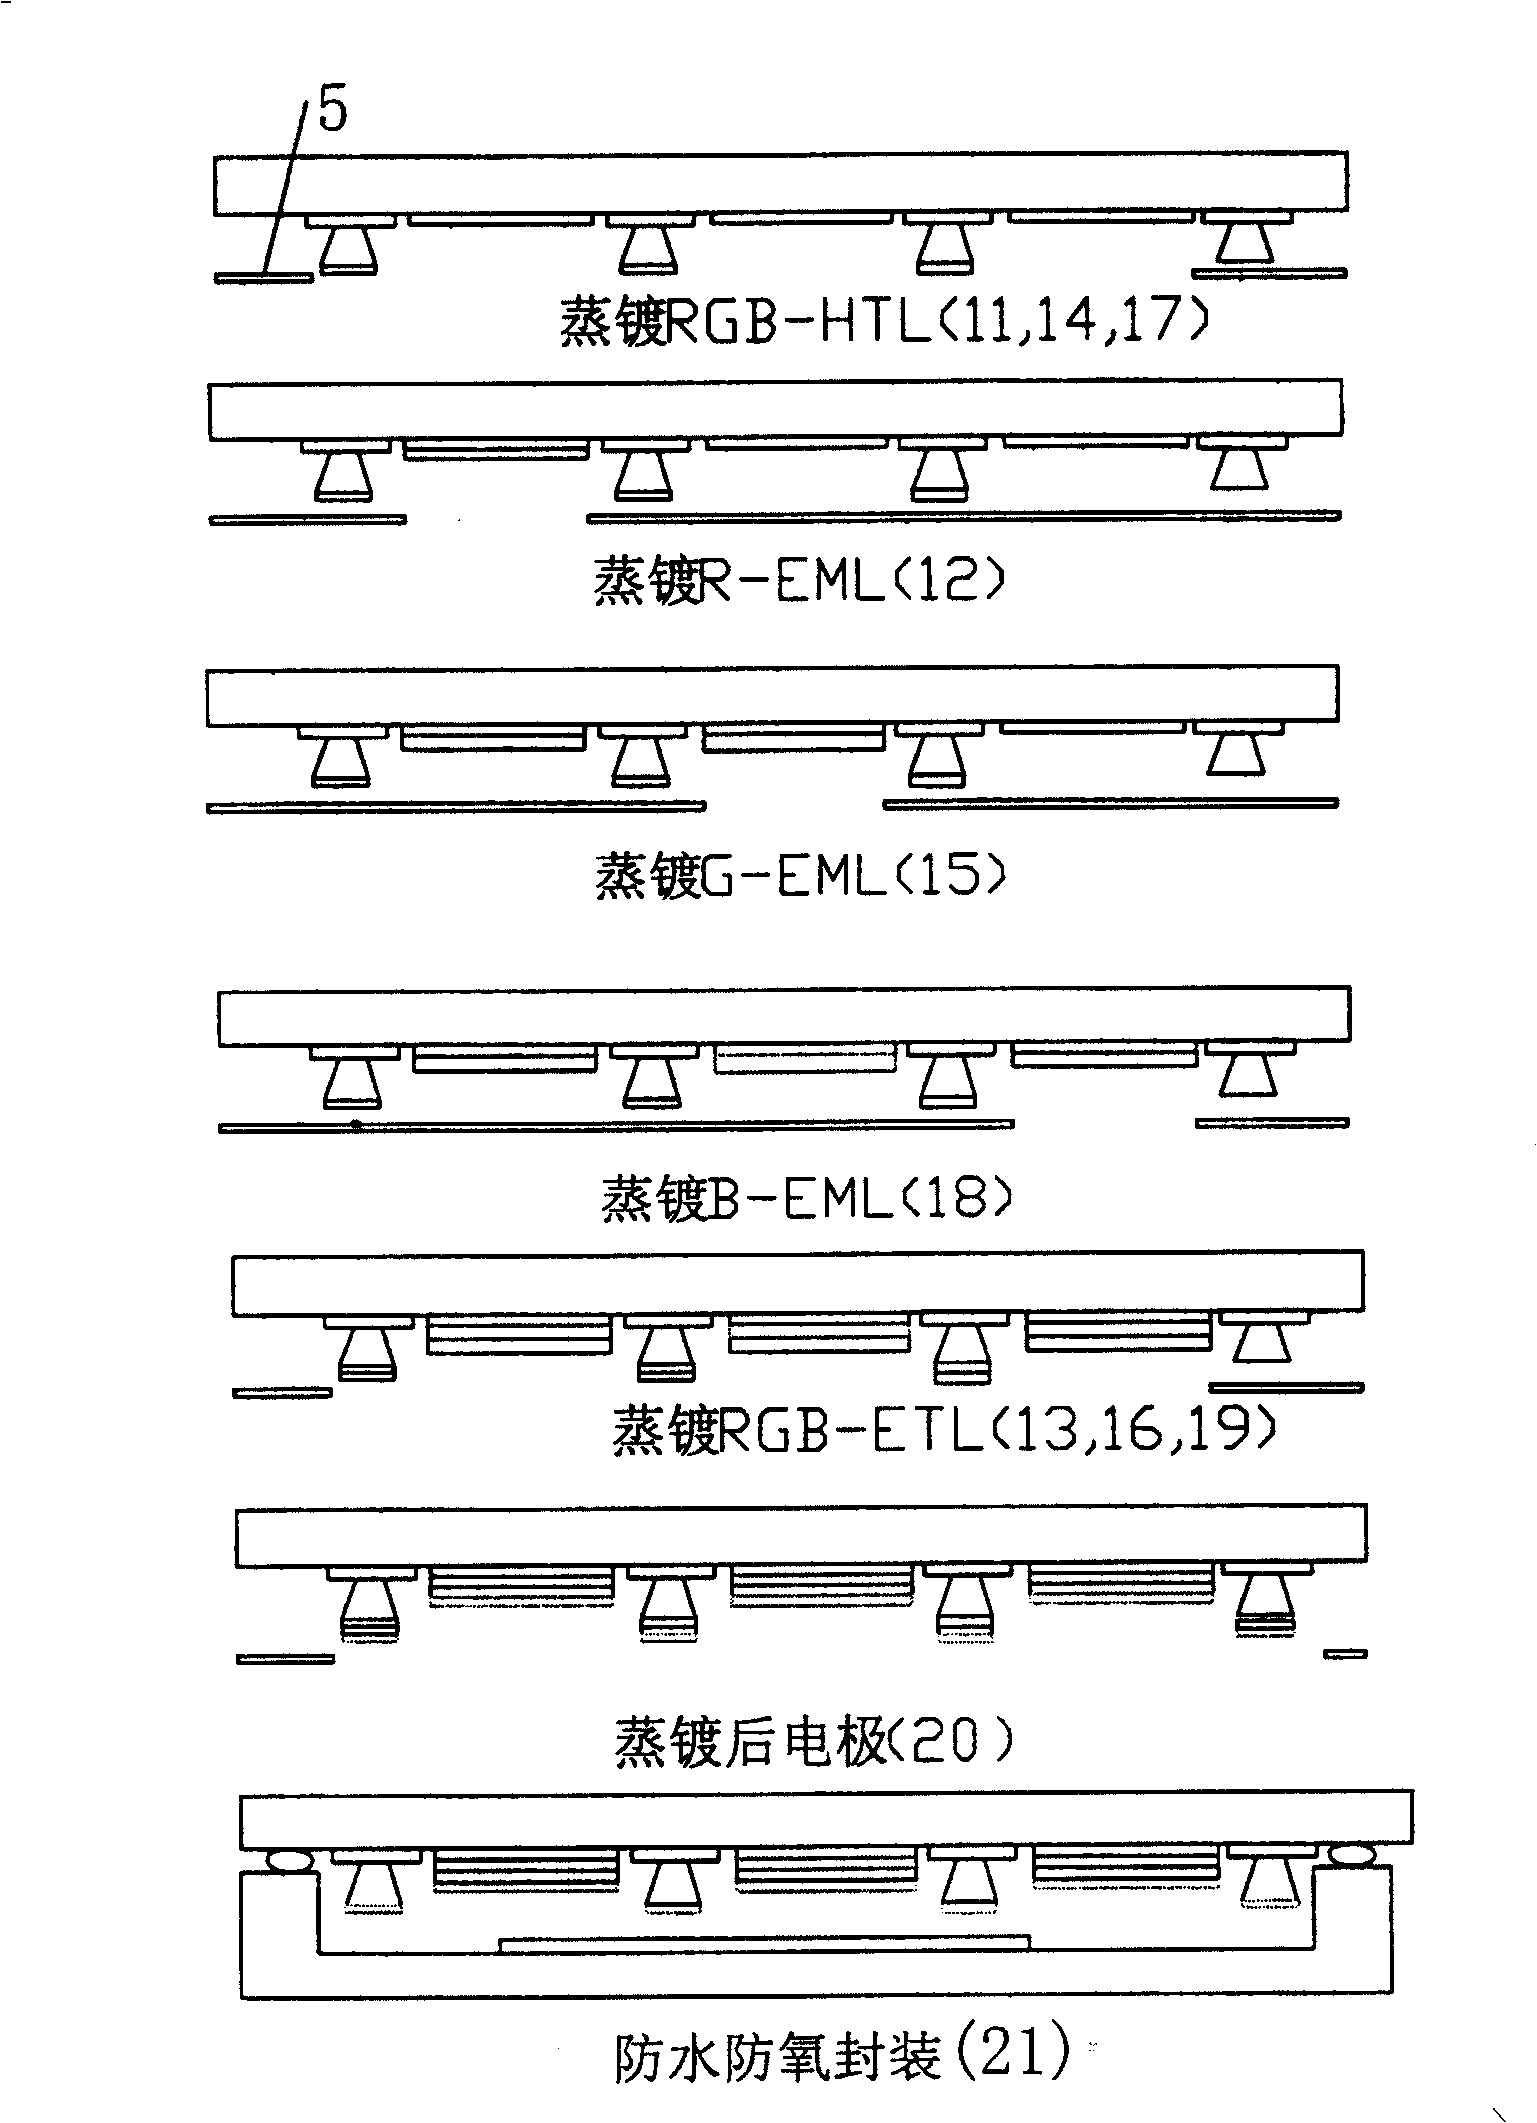 Organic light emitting diode and its producing method